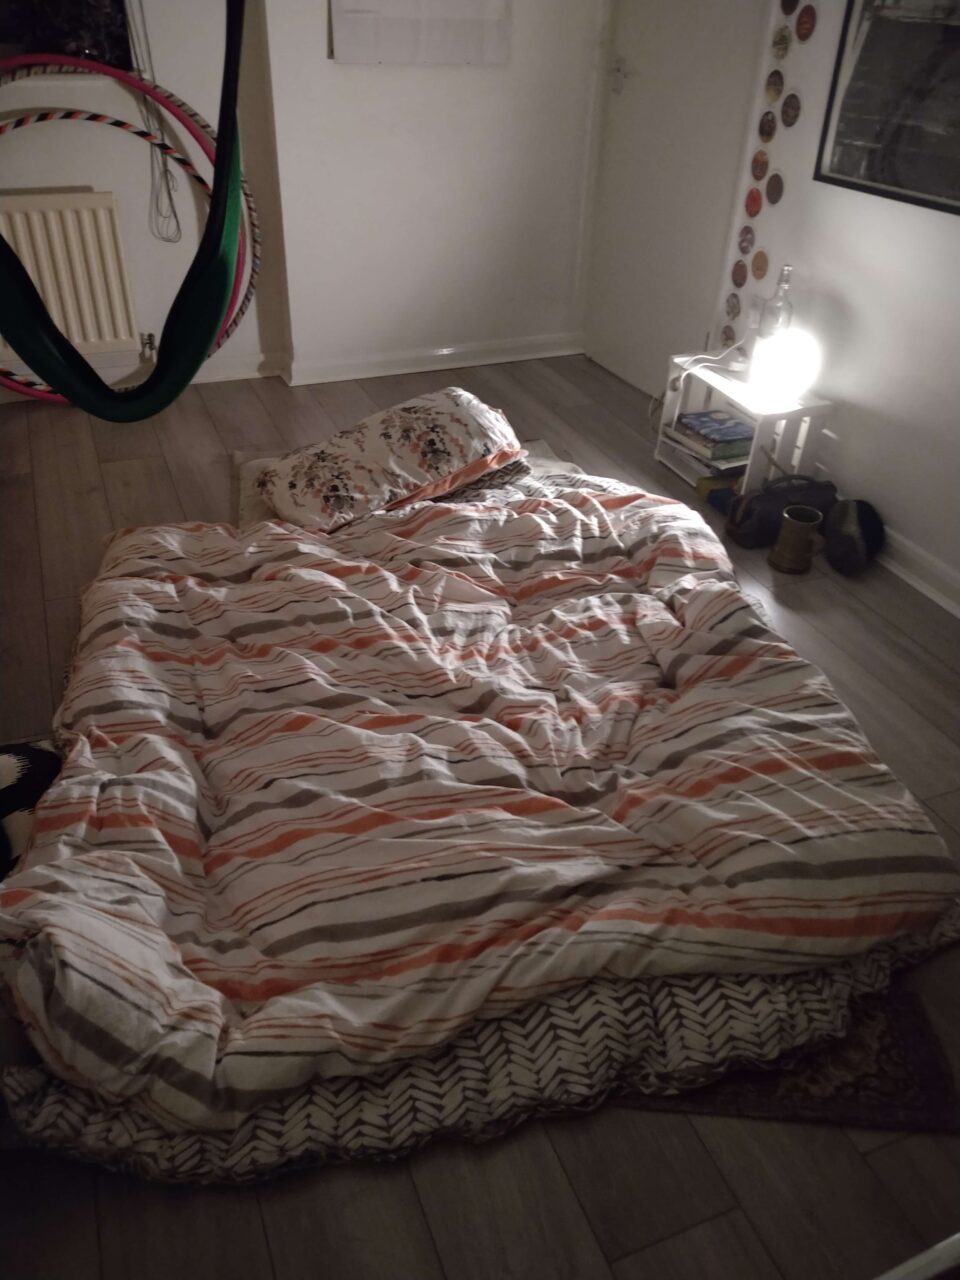 Bed is made up on different quilts on the floor